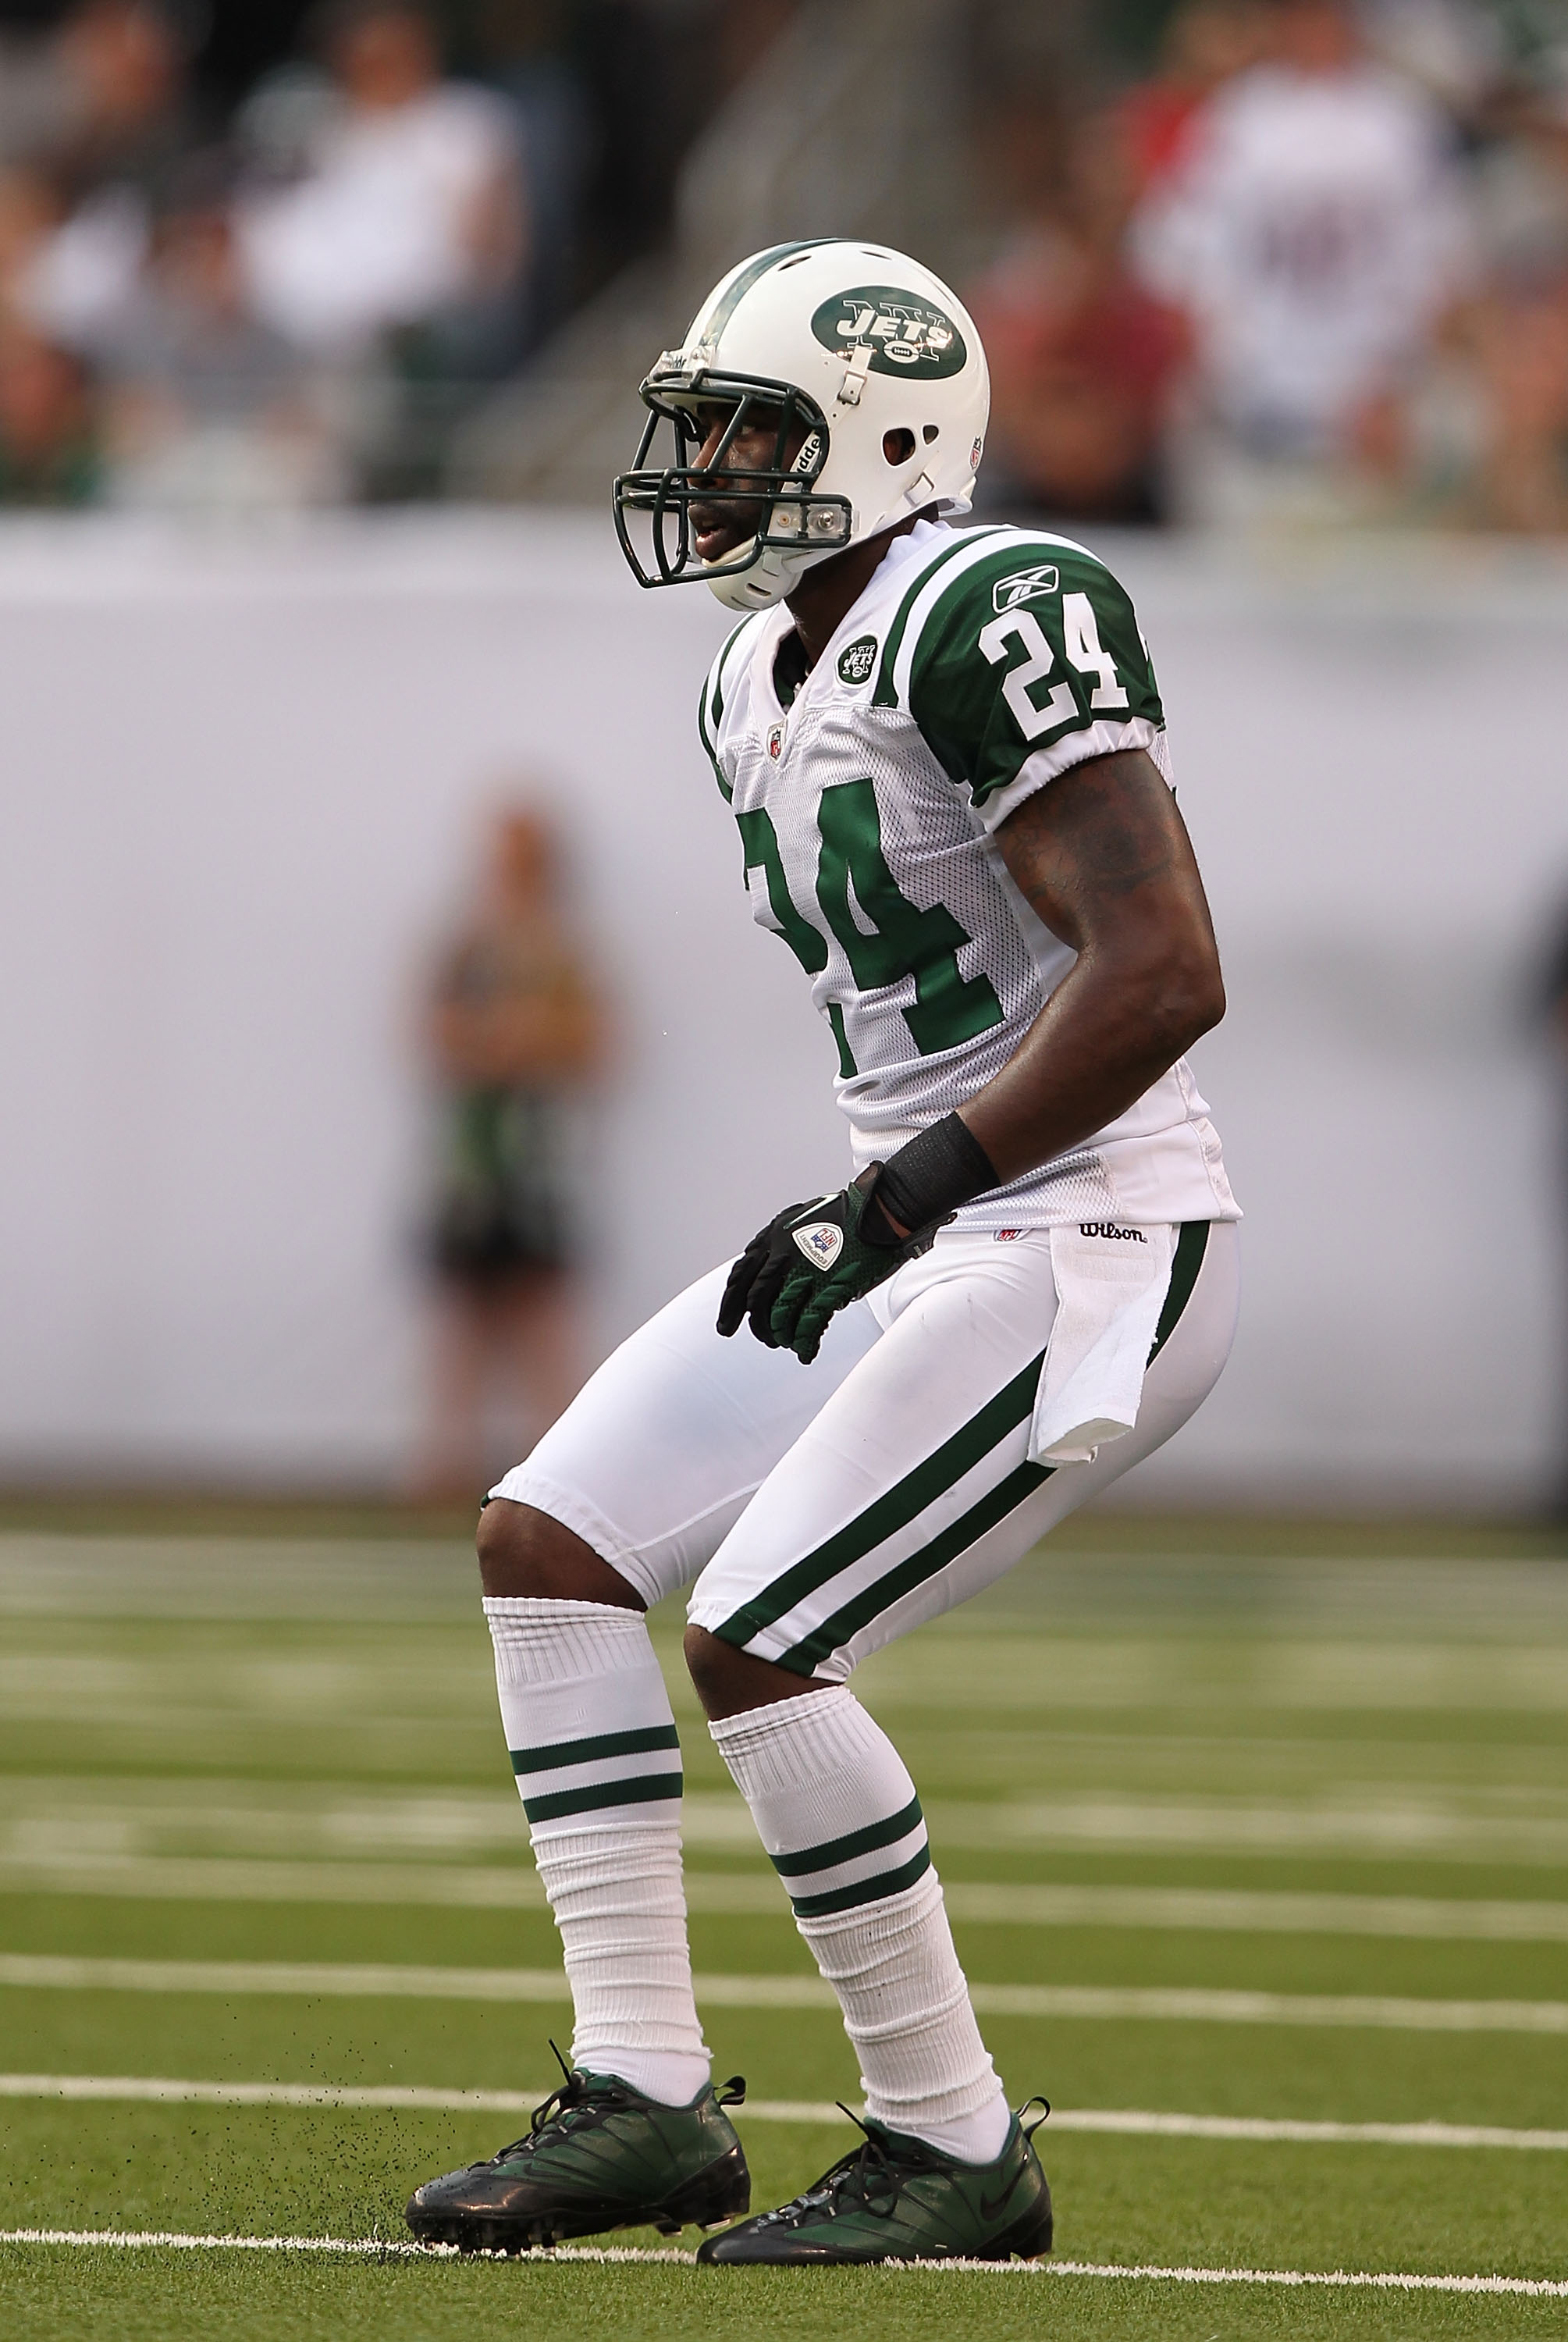 EAST RUTHERFORD, NJ - SEPTEMBER 19:  Darrelle Revis #24 of the New York Jets in action against the New England Patriots during their  game on September 19, 2010 at the New Meadowlands Stadium  in East Rutherford, New Jersey.  (Photo by Al Bello/Getty Imag